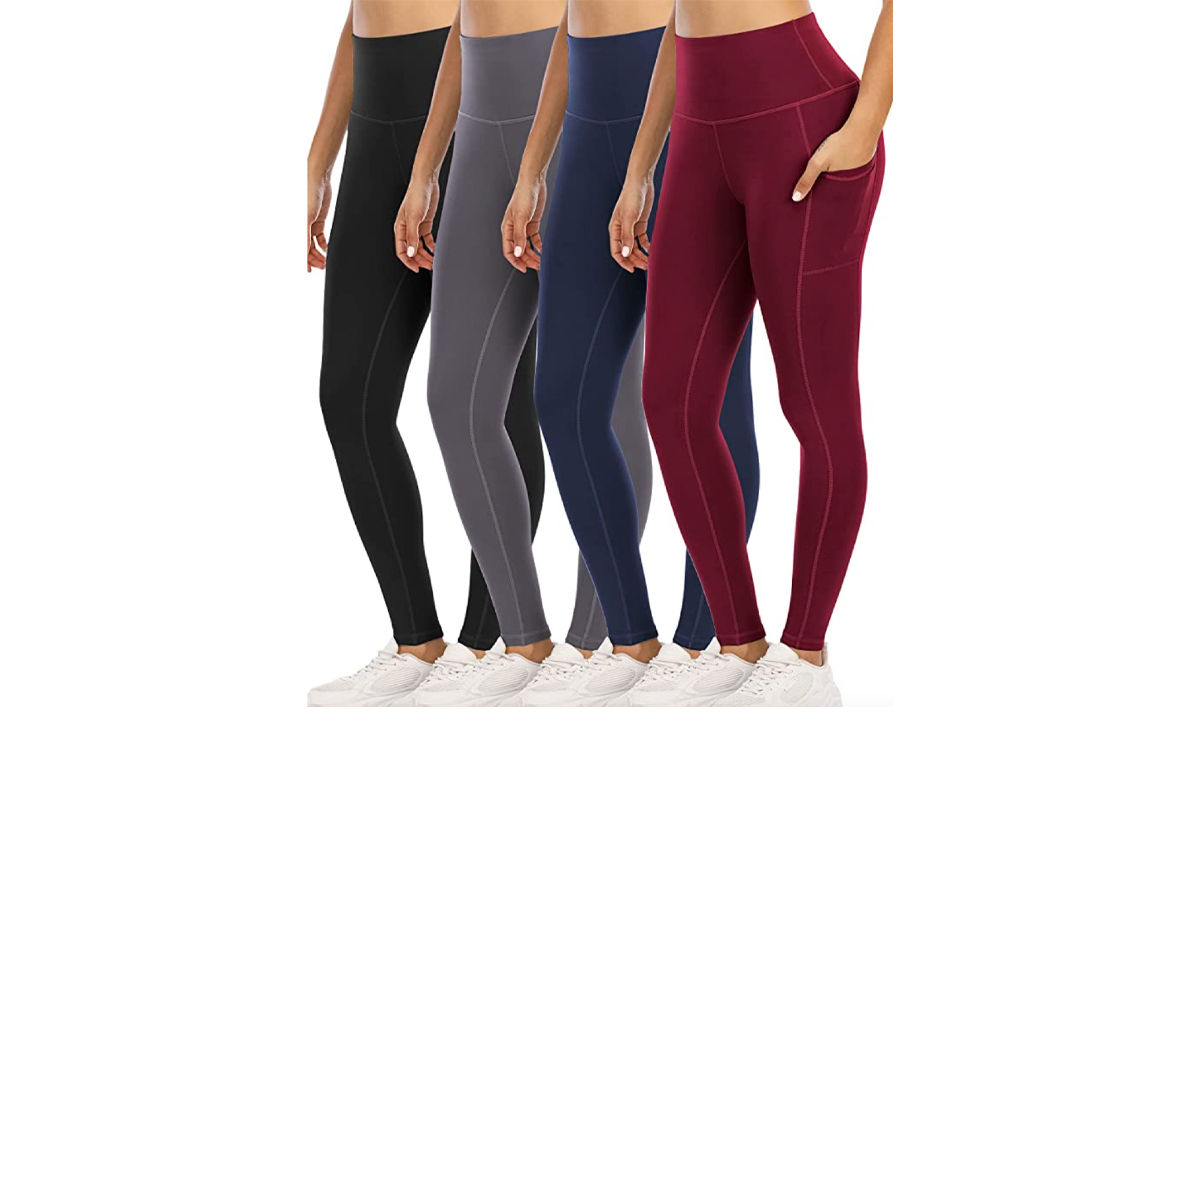 https://akns-images.eonline.com/eol_images/Entire_Site/2022912/rs_1200x1200-221012055334-leggings-deal-1200-.jpg?fit=around%7C100:100&output-quality=90&crop=100:100;center,top